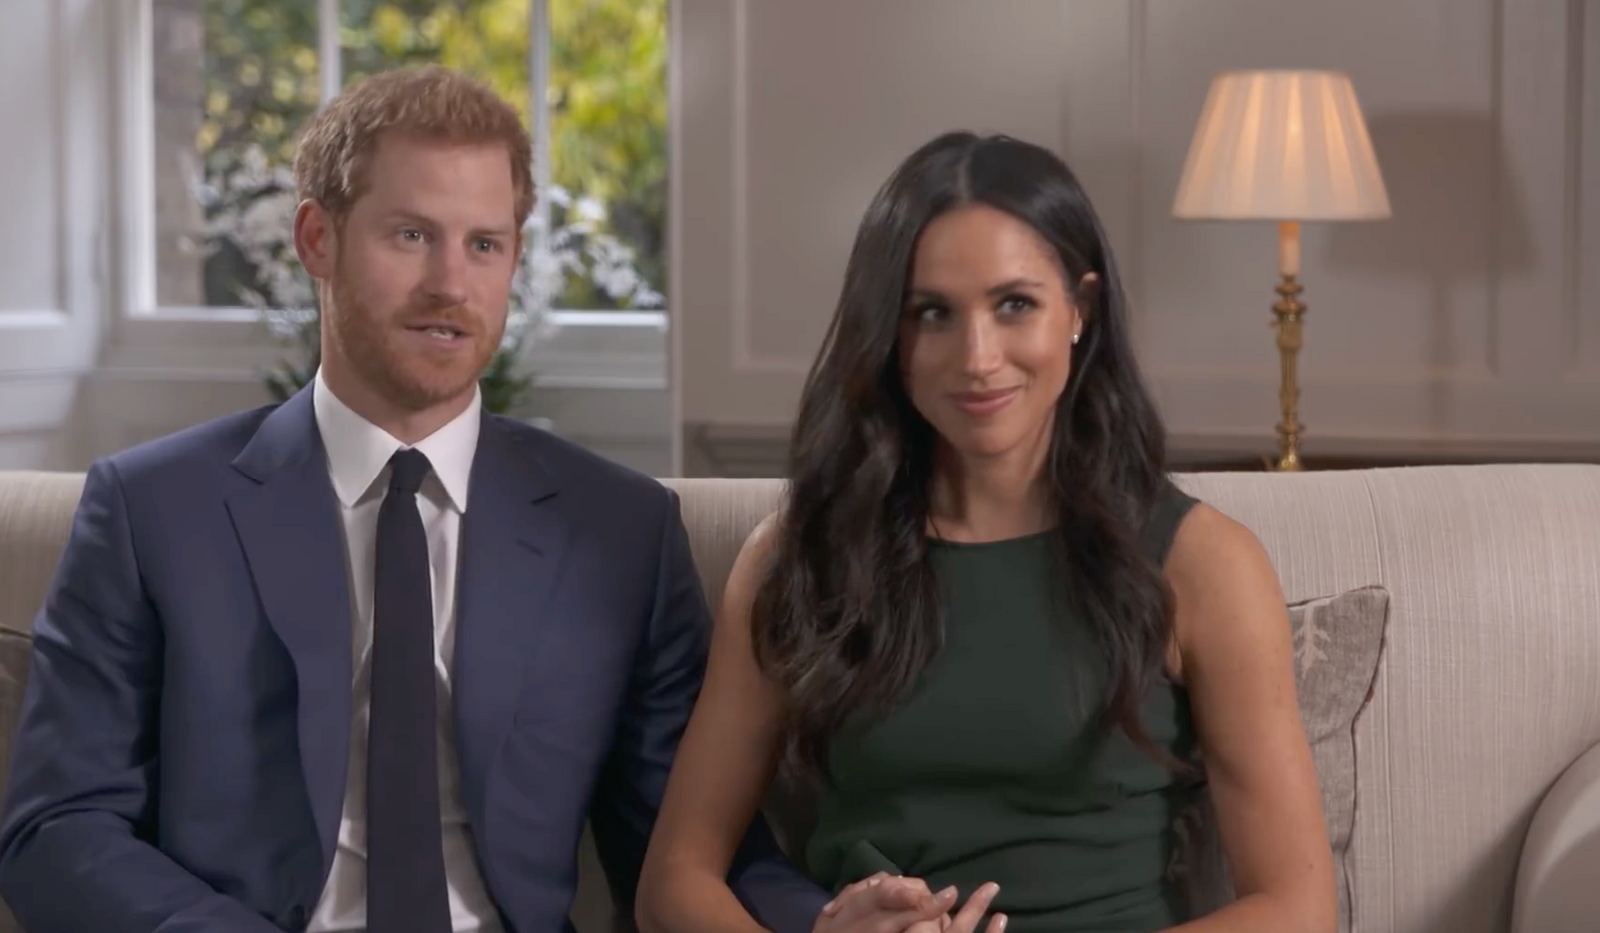 meghan-markle-prince-harry-heartbreak-couple-must-stop-playing-victim-drop-projects-to-fix-relationship-with-royal-family-sussex-pair-reportedly-doing-second-bombshell-interview